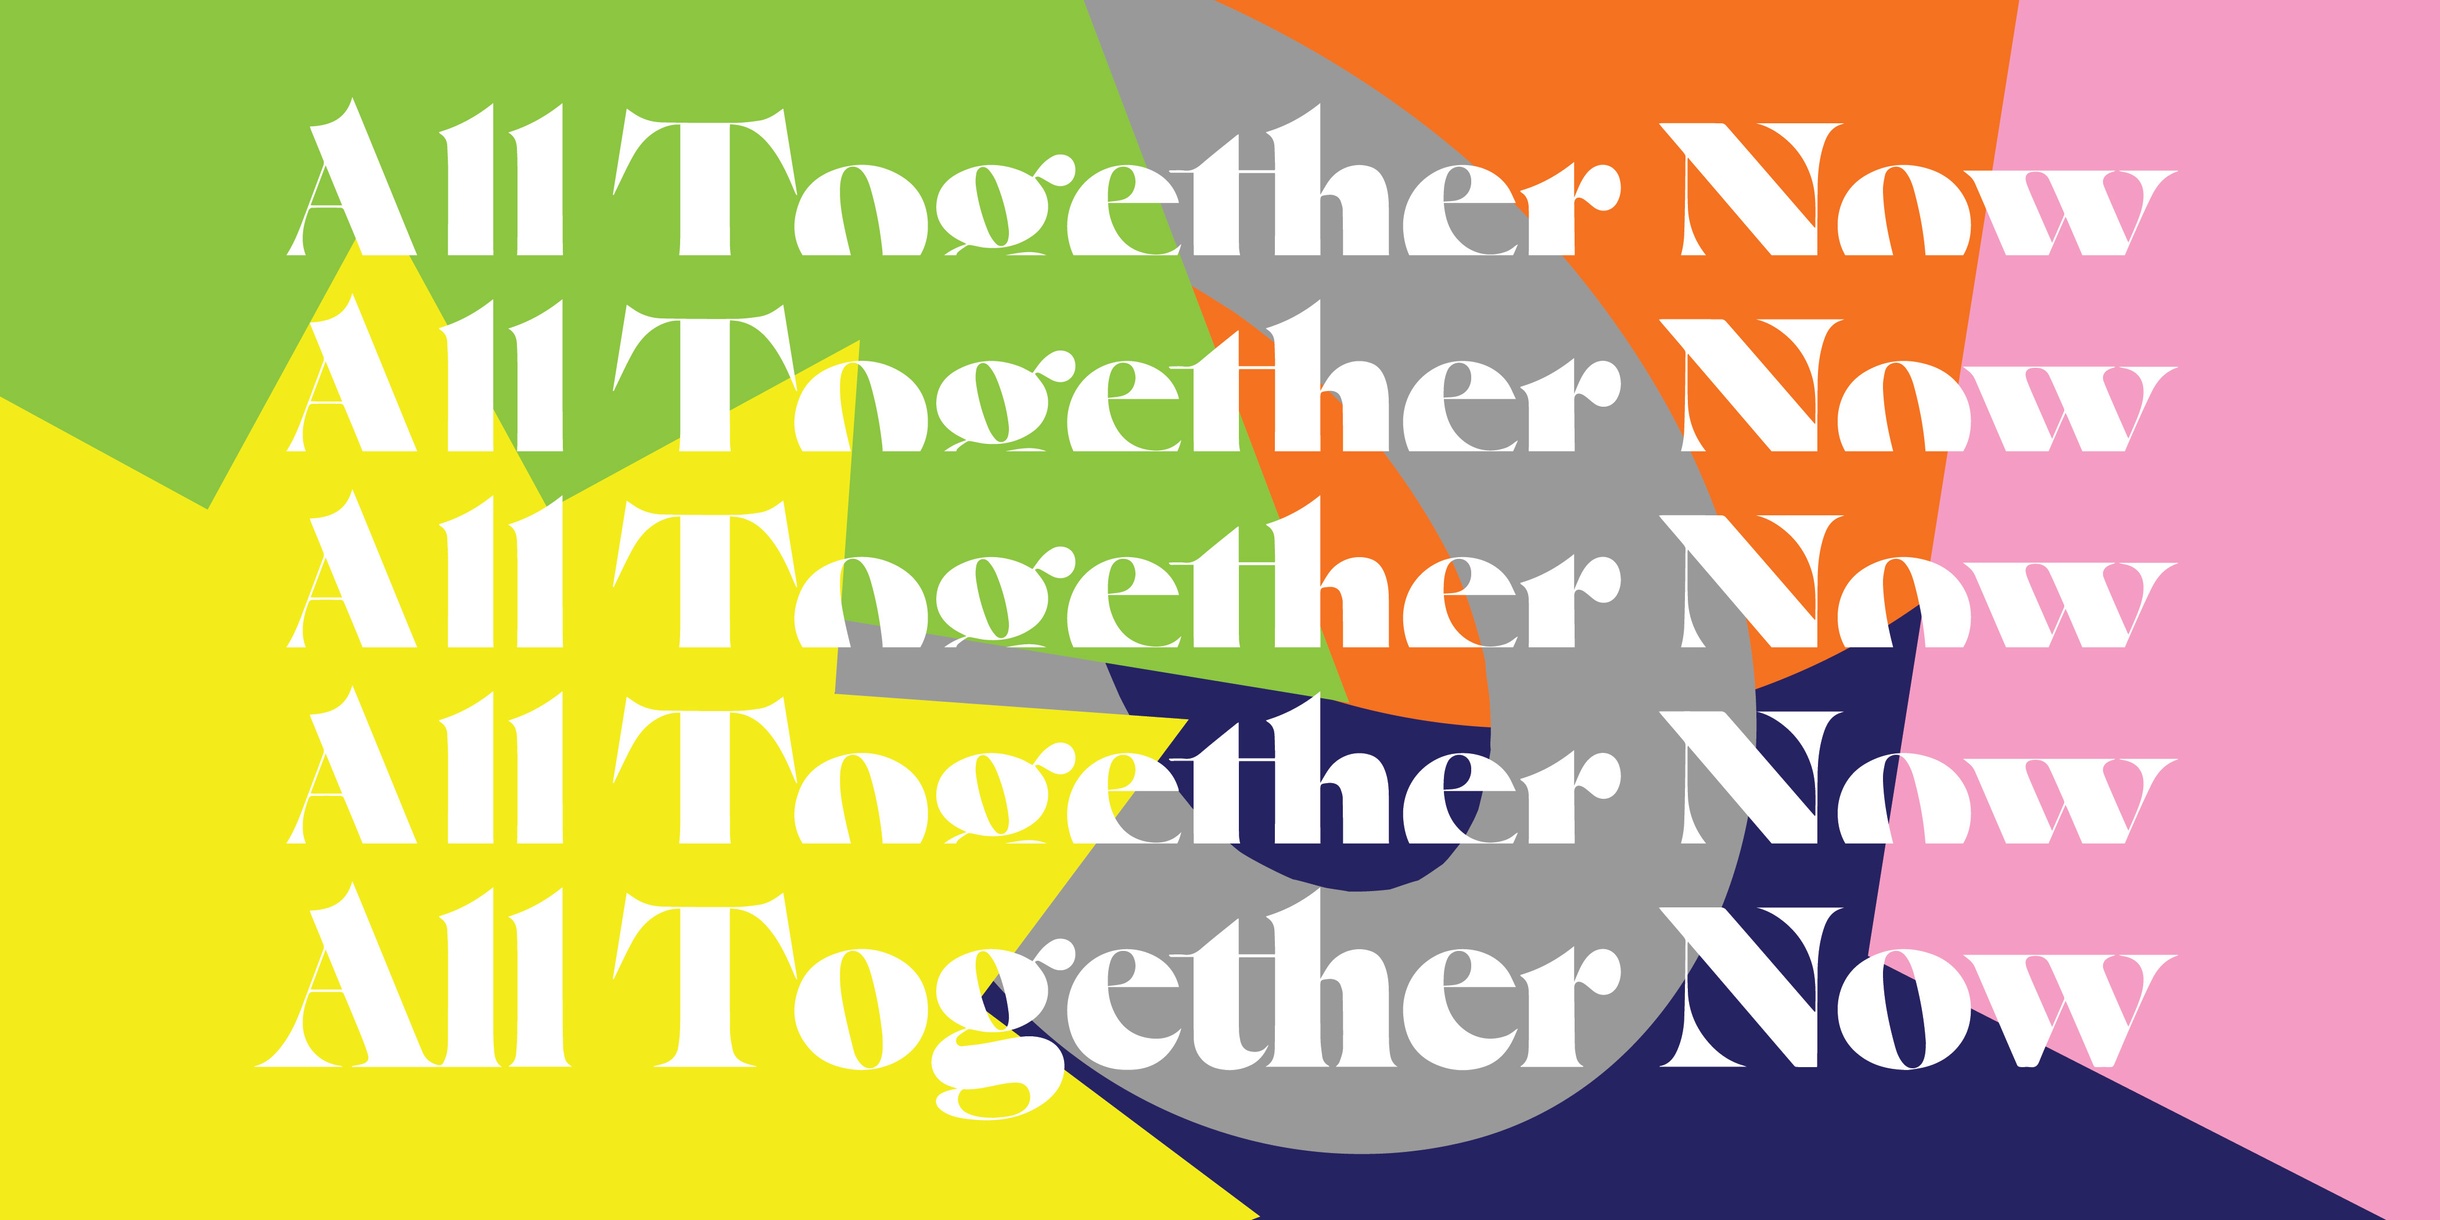 A colorful graphic pattern with the words "All Together Now" repeated five times in a vertical stack.